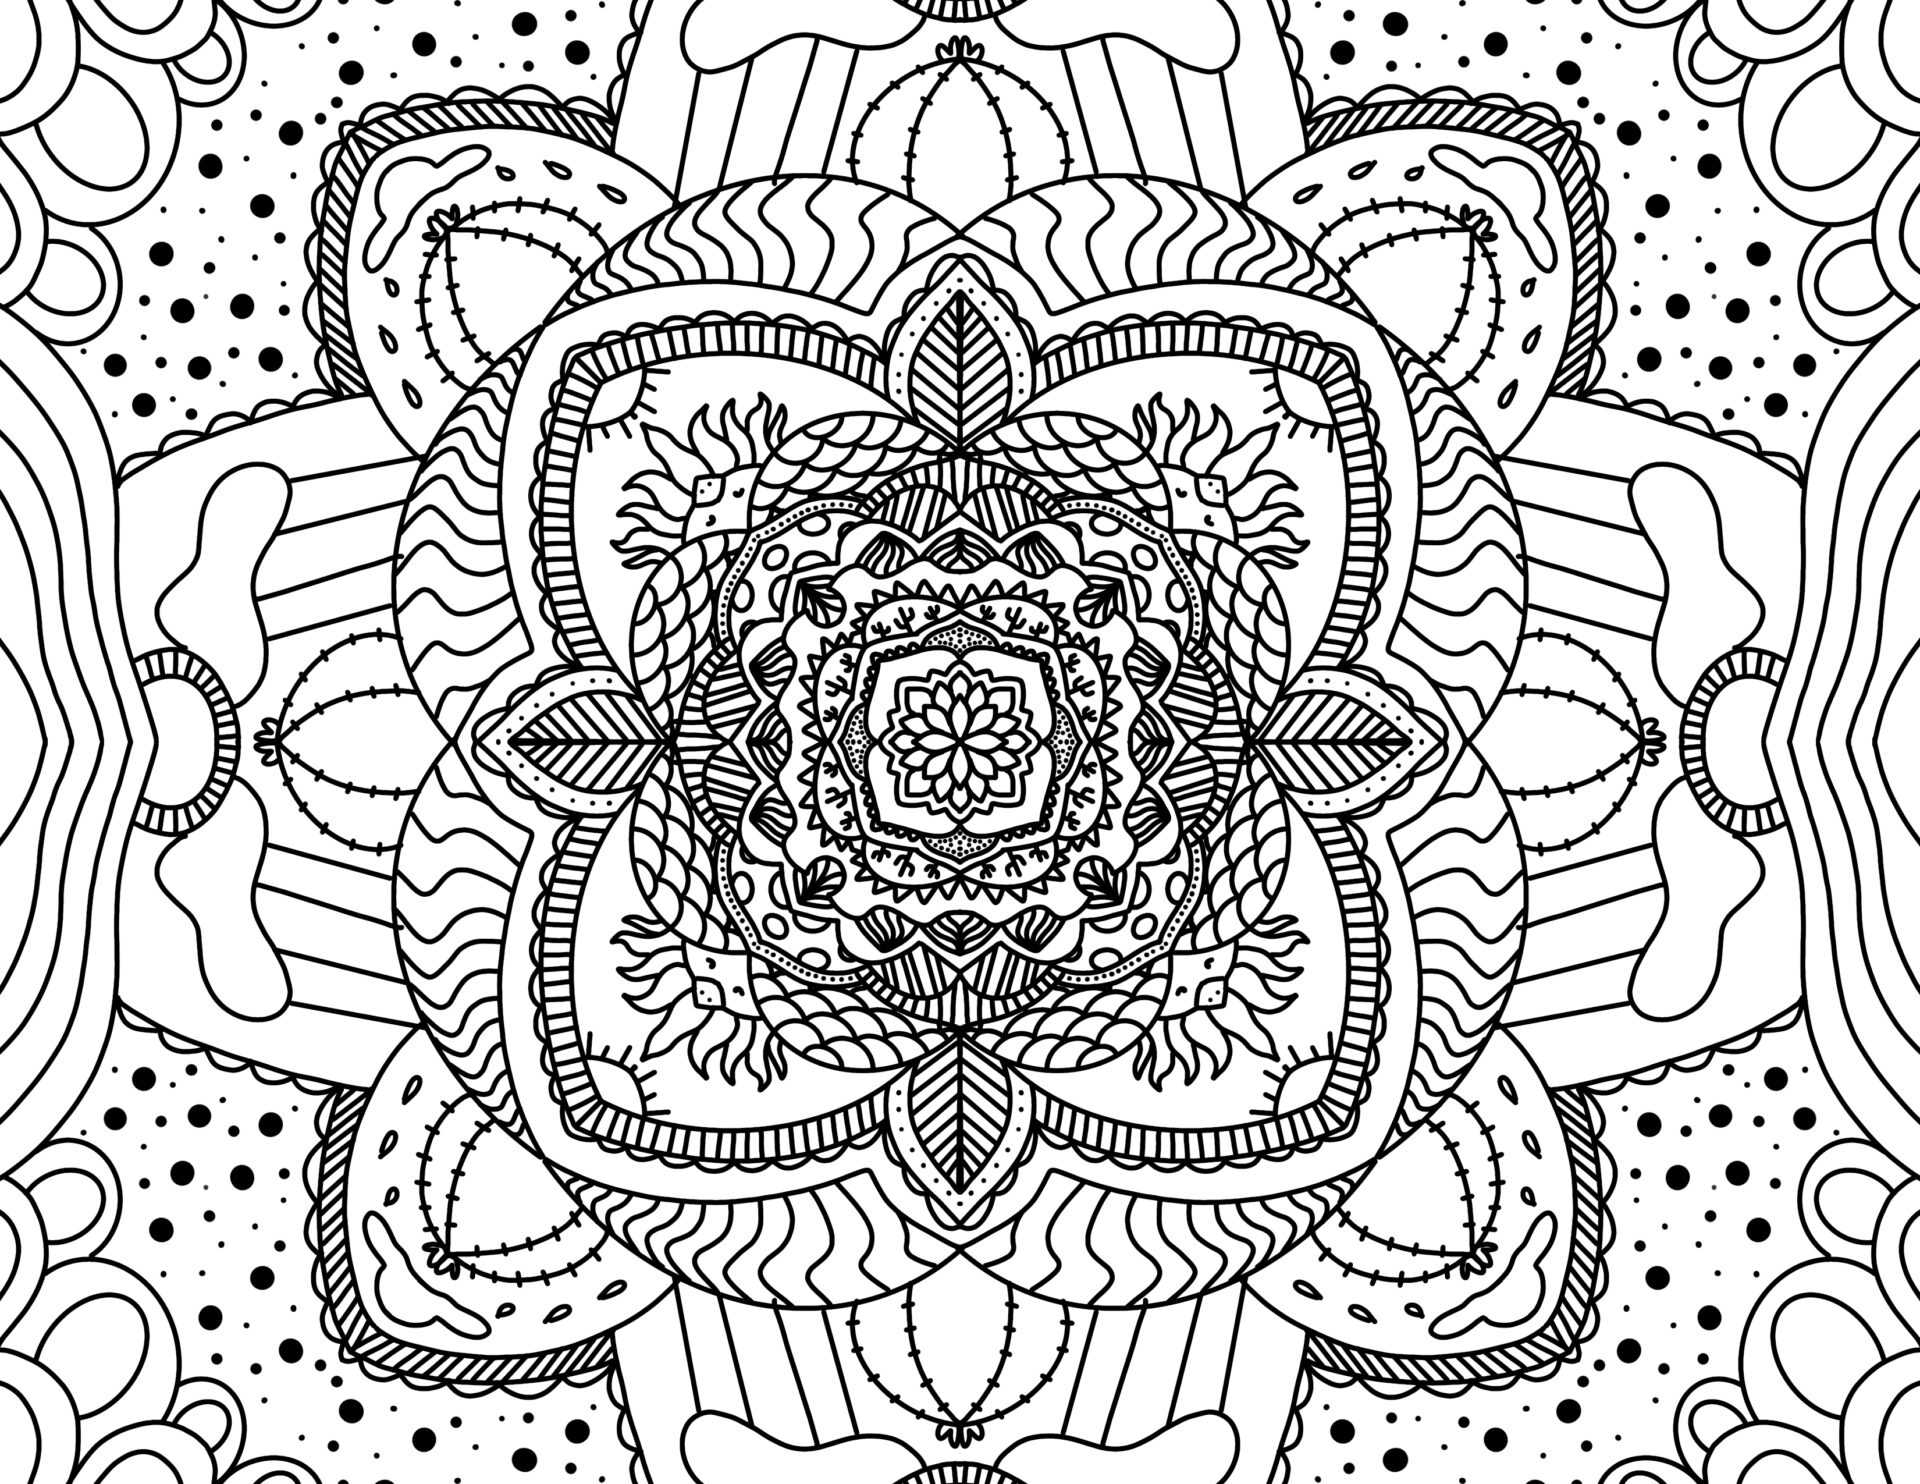 Earth Day DBG Coloring Sheet